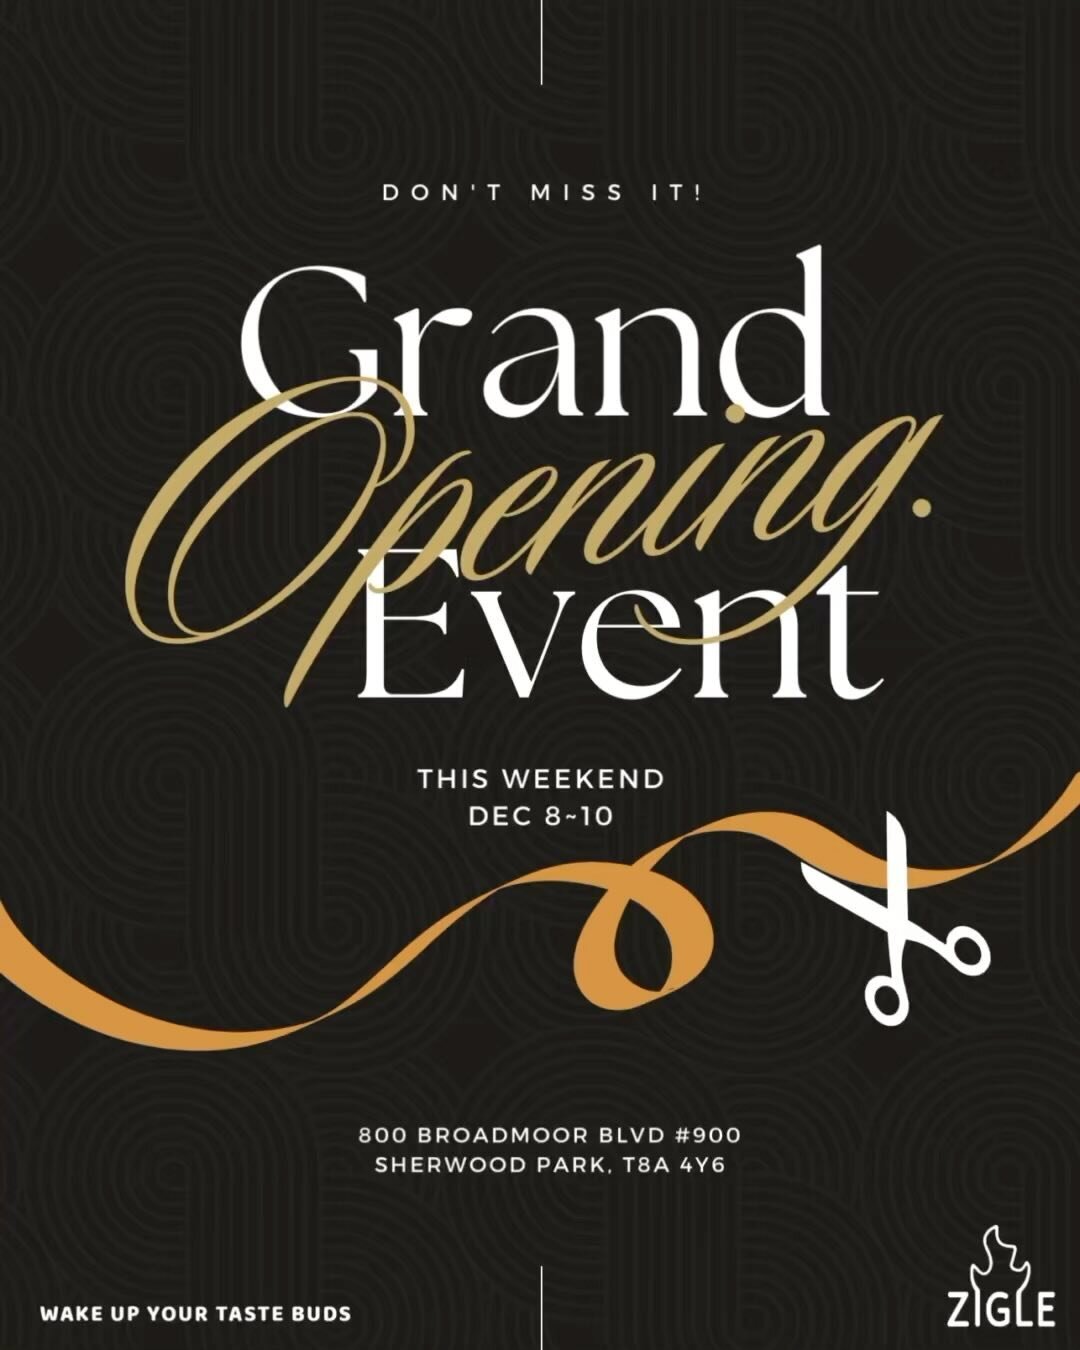 🎇 ZIGLE GRAND OPENING WEEKEND GIVEAWAY!

We&rsquo;re celebrating our grand opening, and what better way than with a fantastic giveaway just for you? 
4 Lucky winners have a chance to win one of the following:
2 x $100 Gift card
2 x $50 Gift card

To